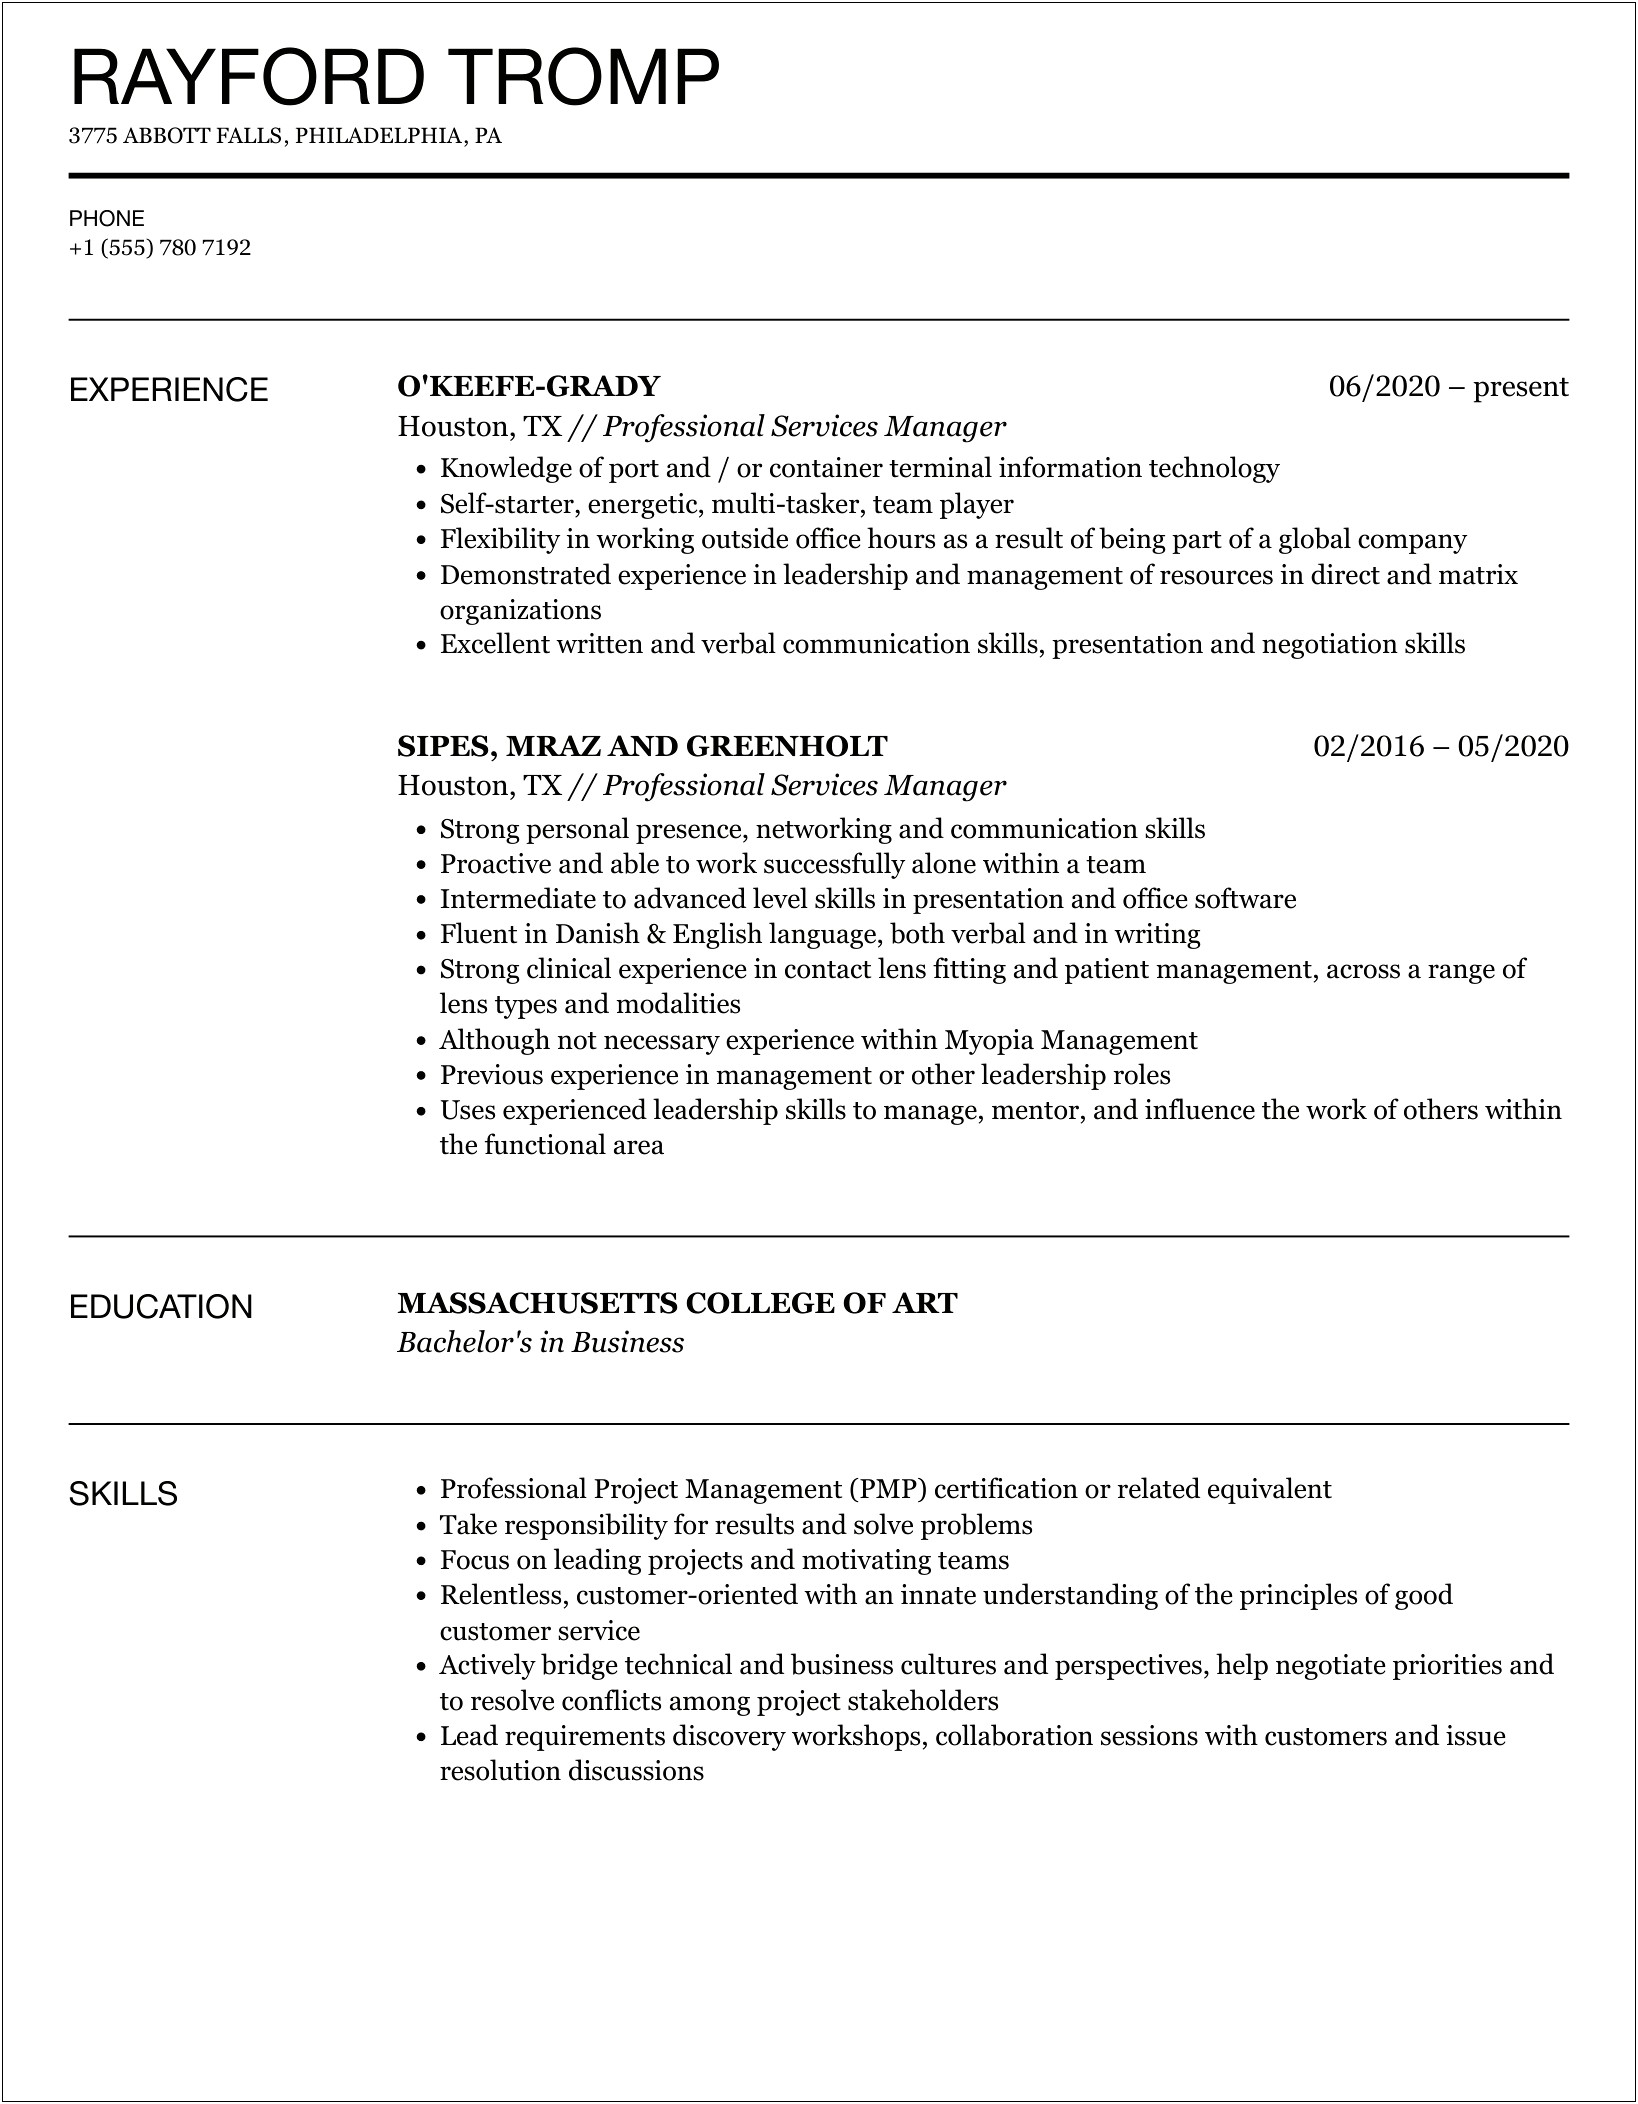 Resume Wording Responsible Manage Direct Lead